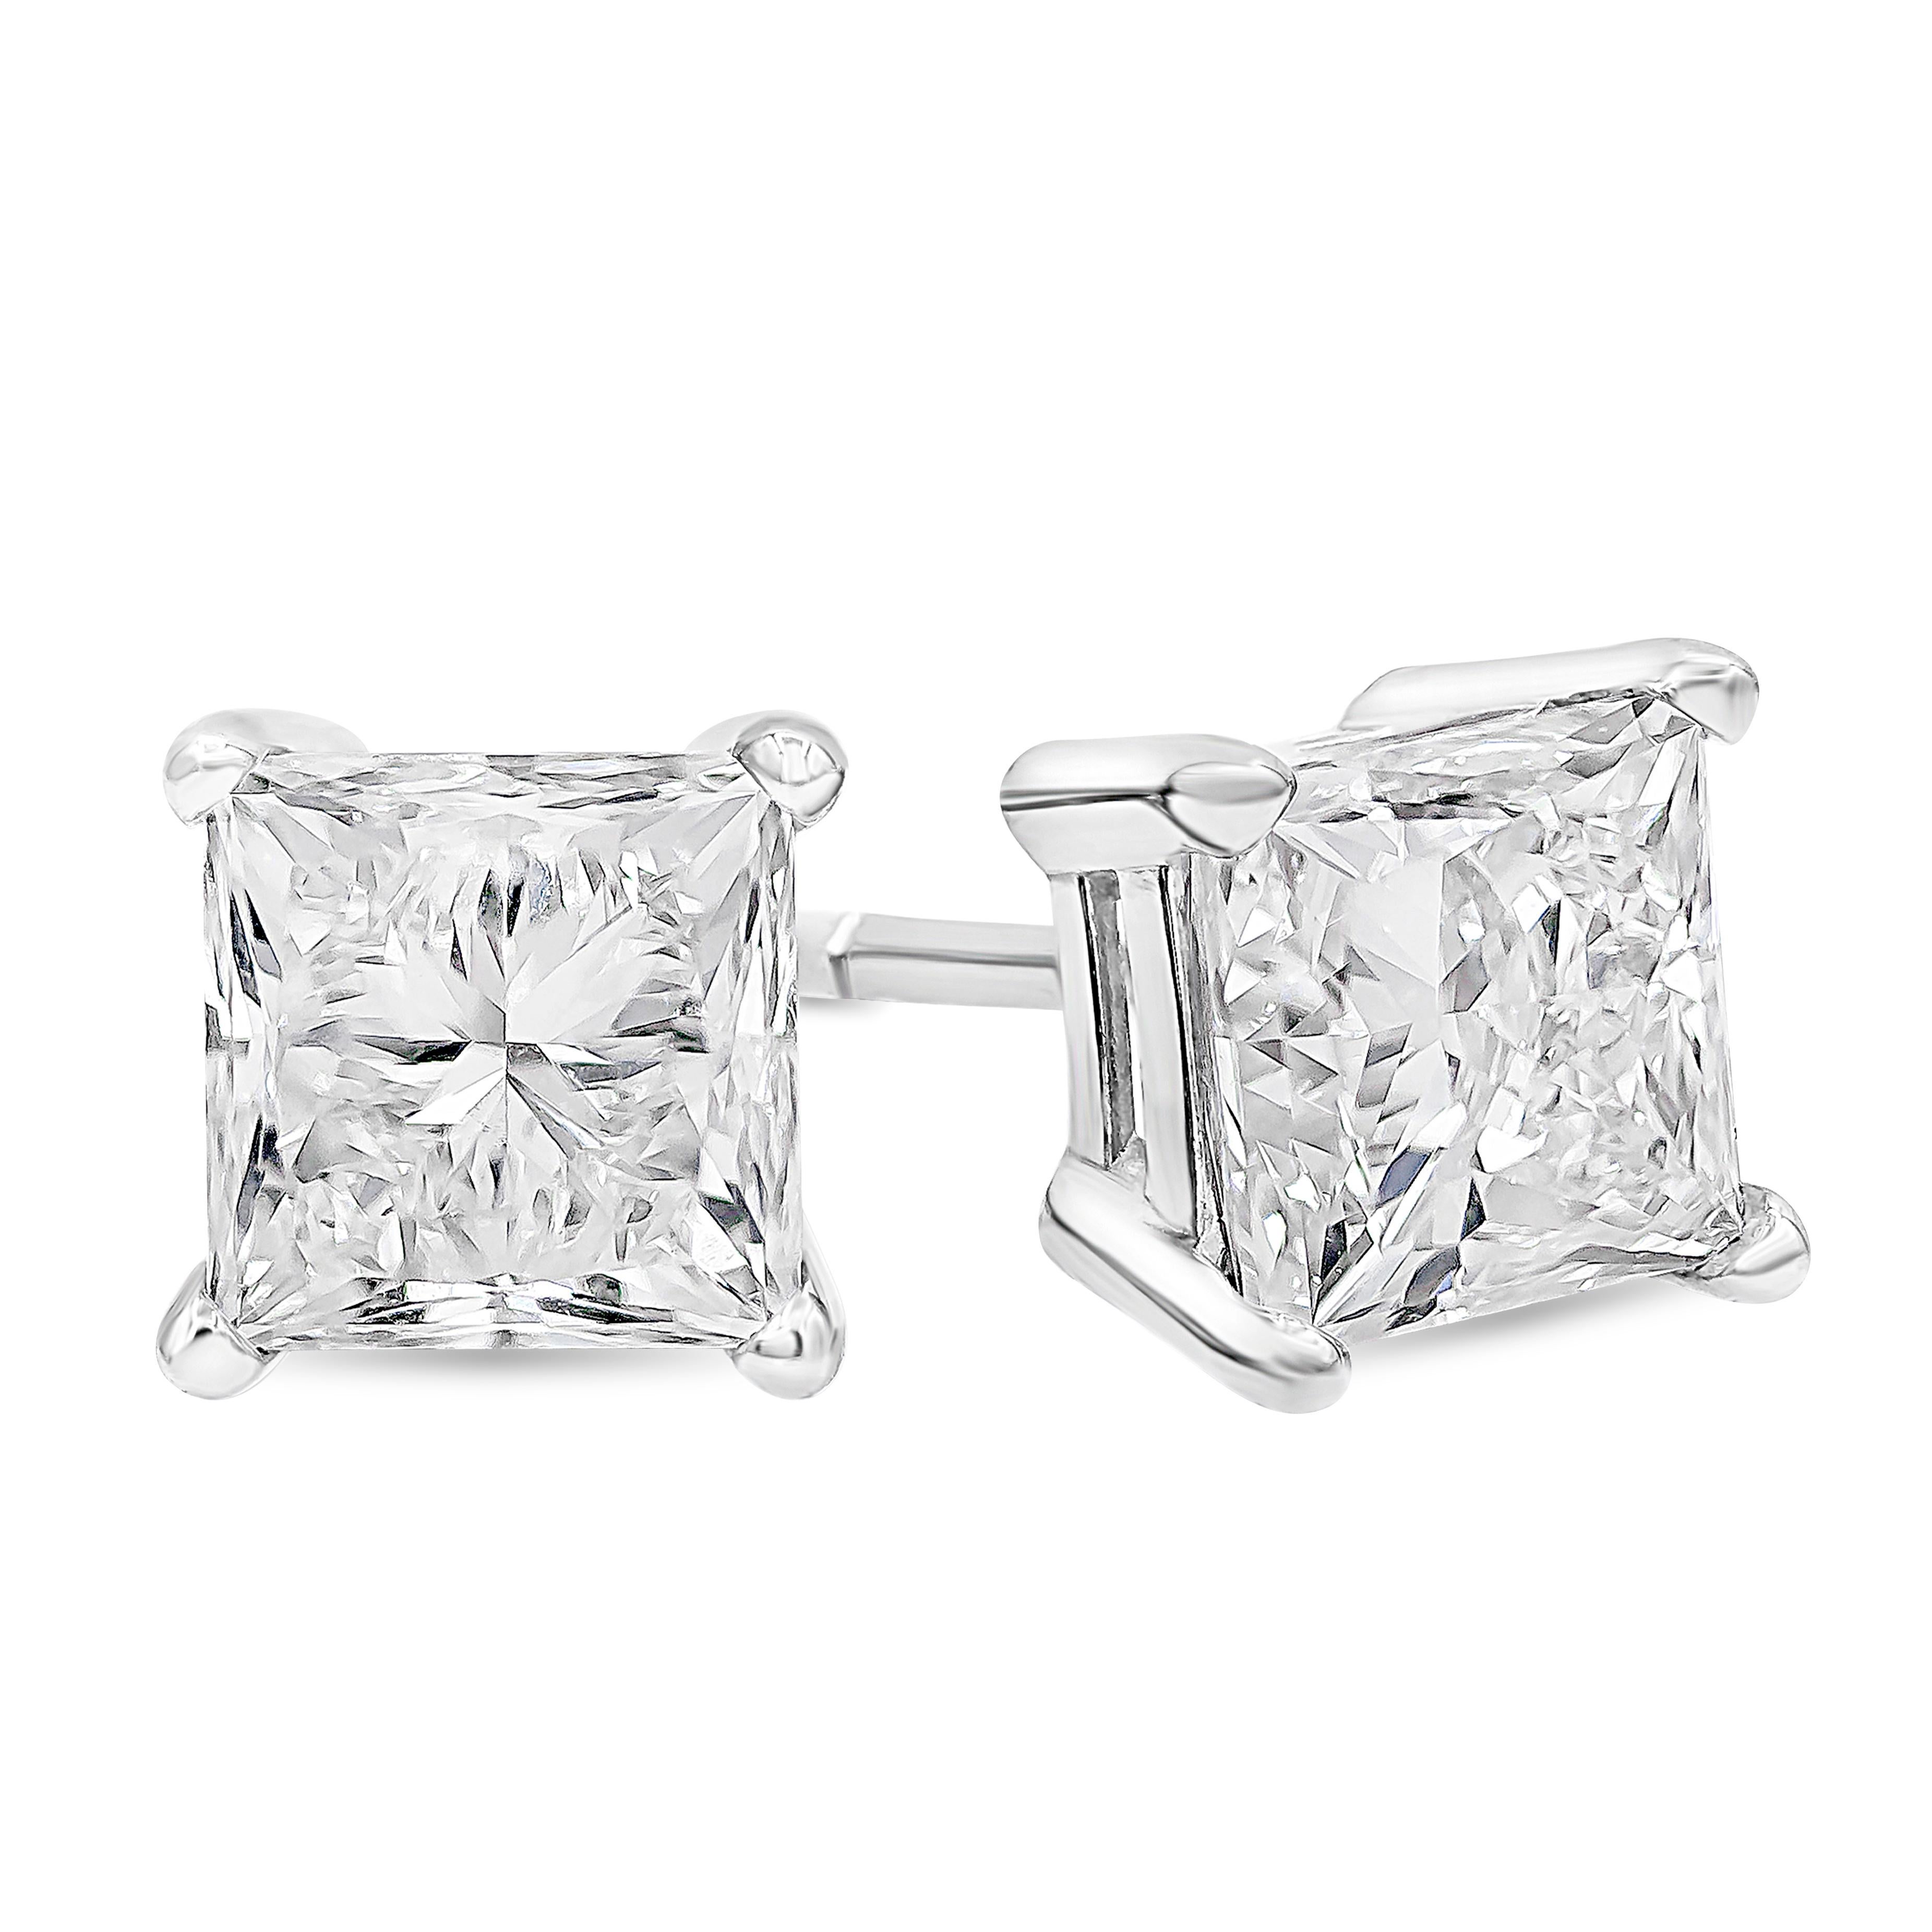 1.04 Carats Total Princess Cut Diamond Stud Earrings in White Gold In New Condition For Sale In New York, NY